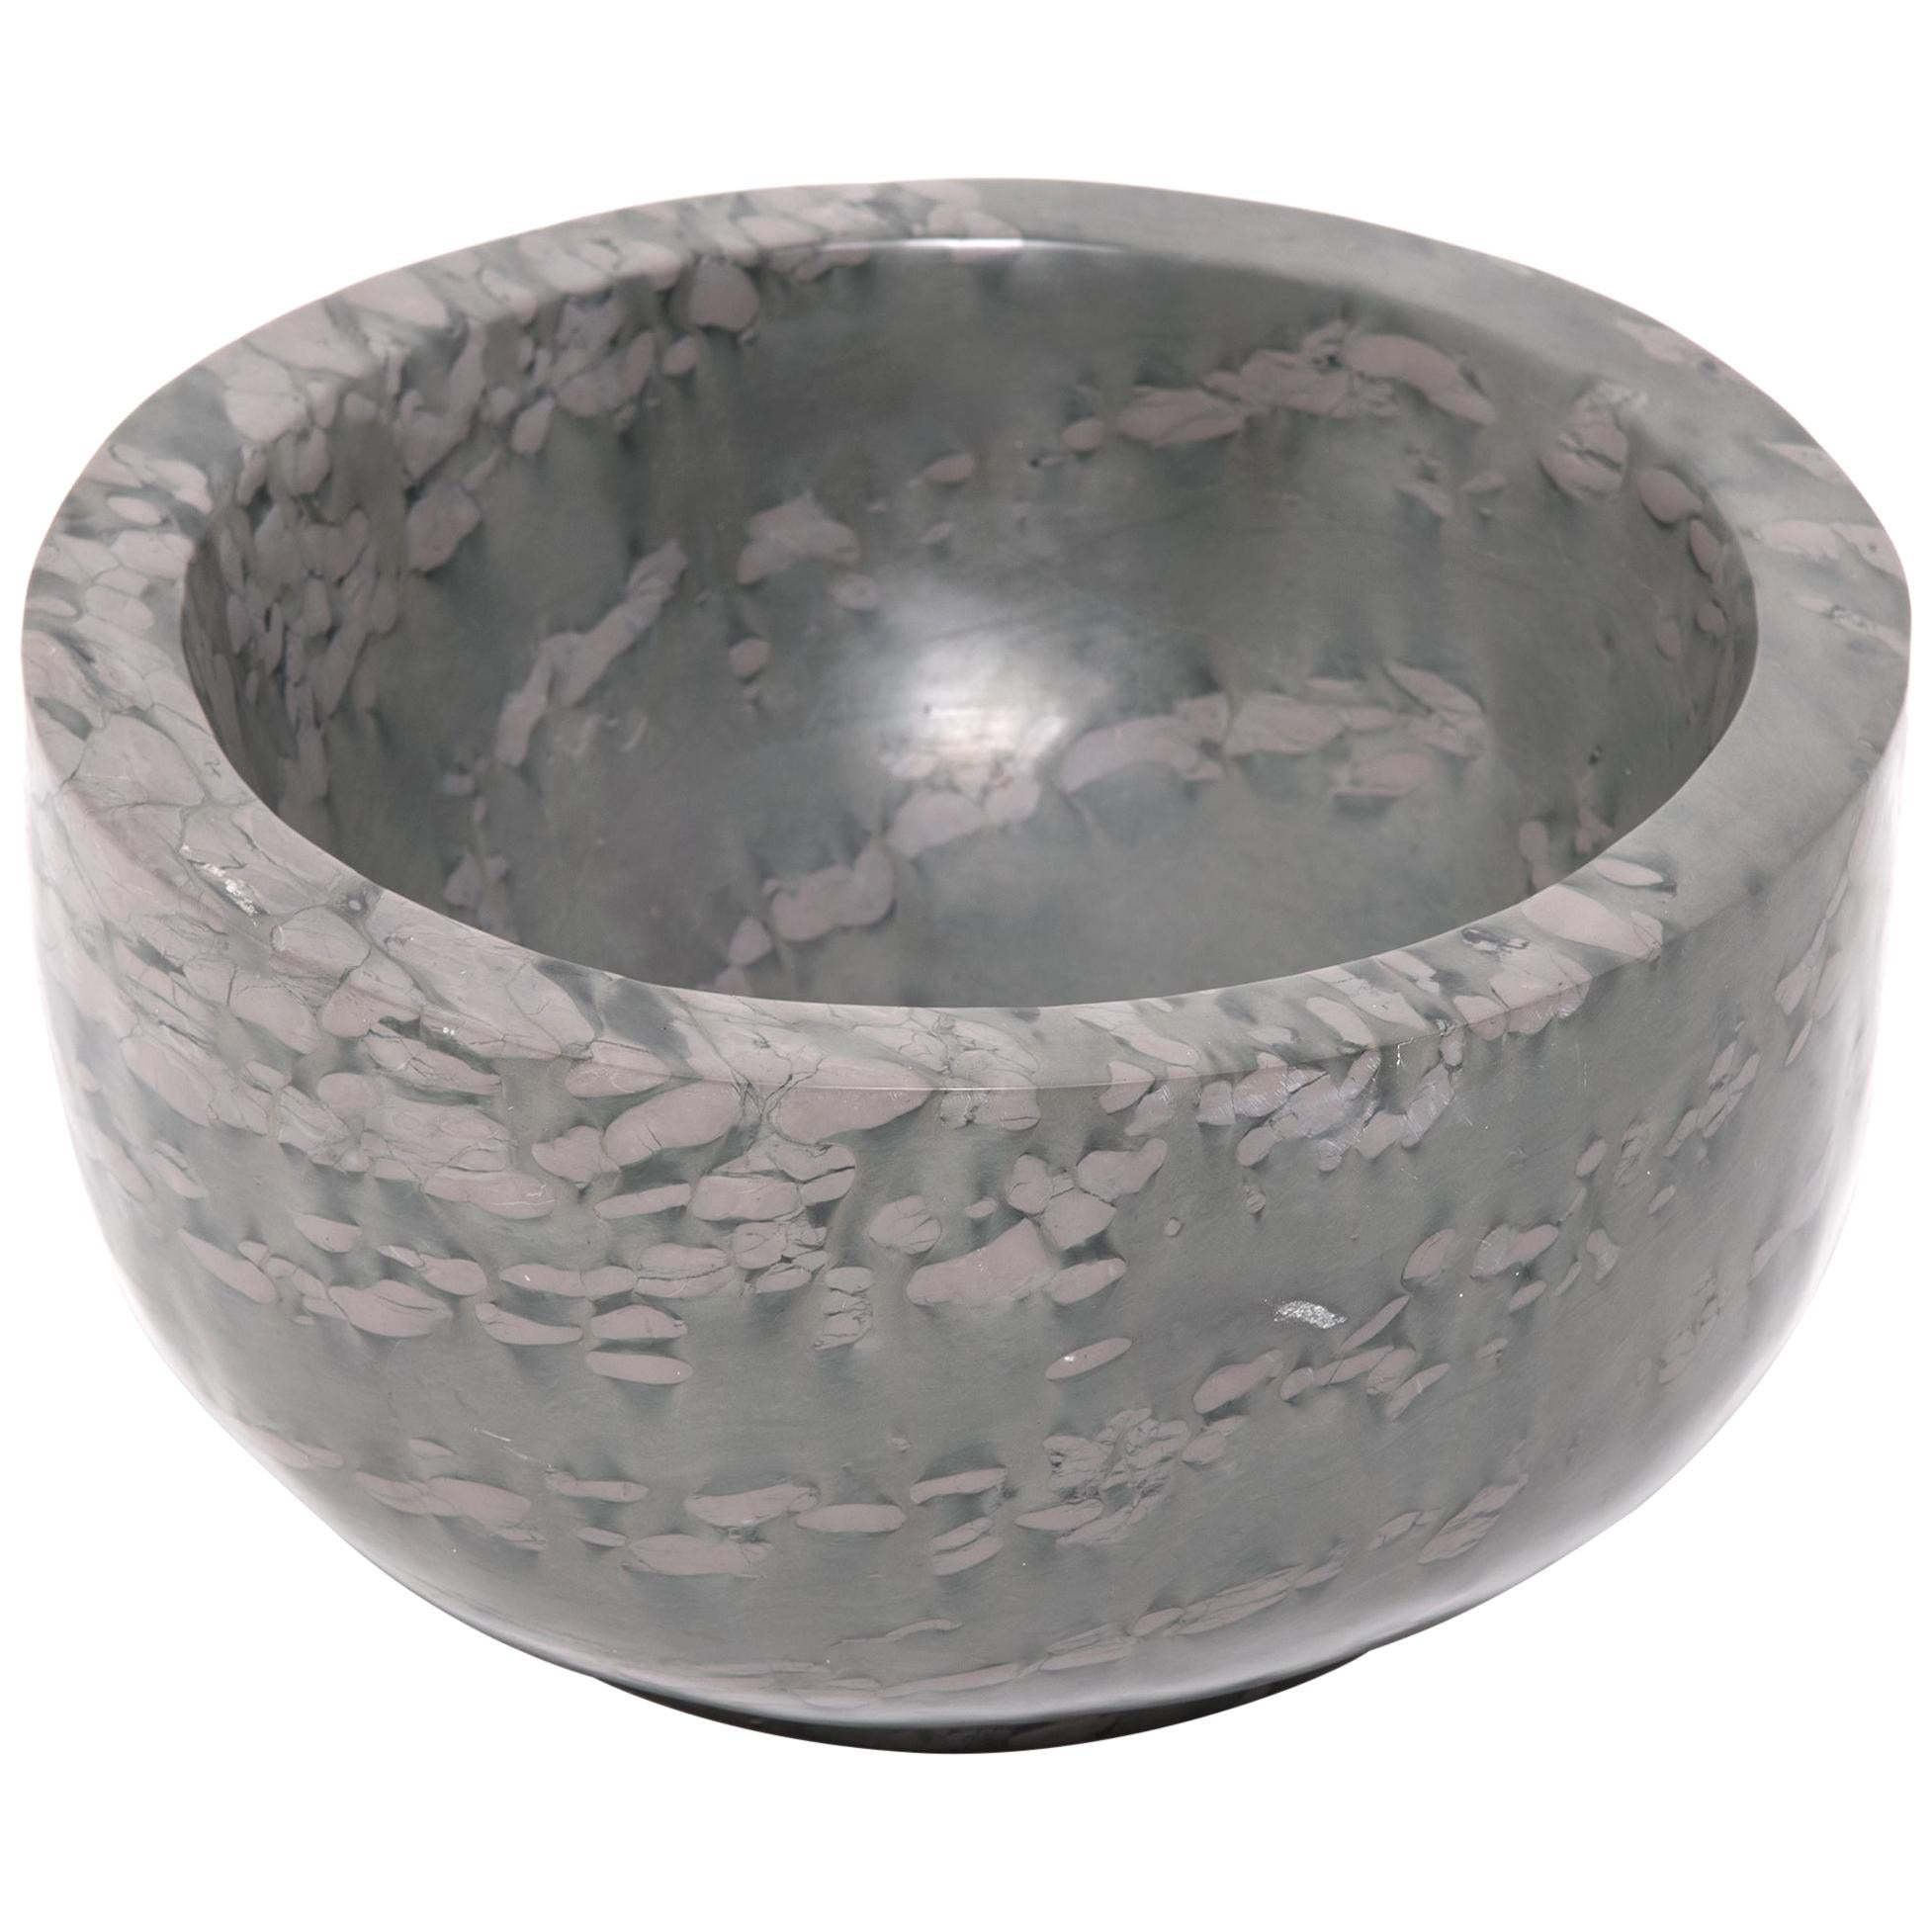 Hand Carved Footed Zhenzhu Stone Basin